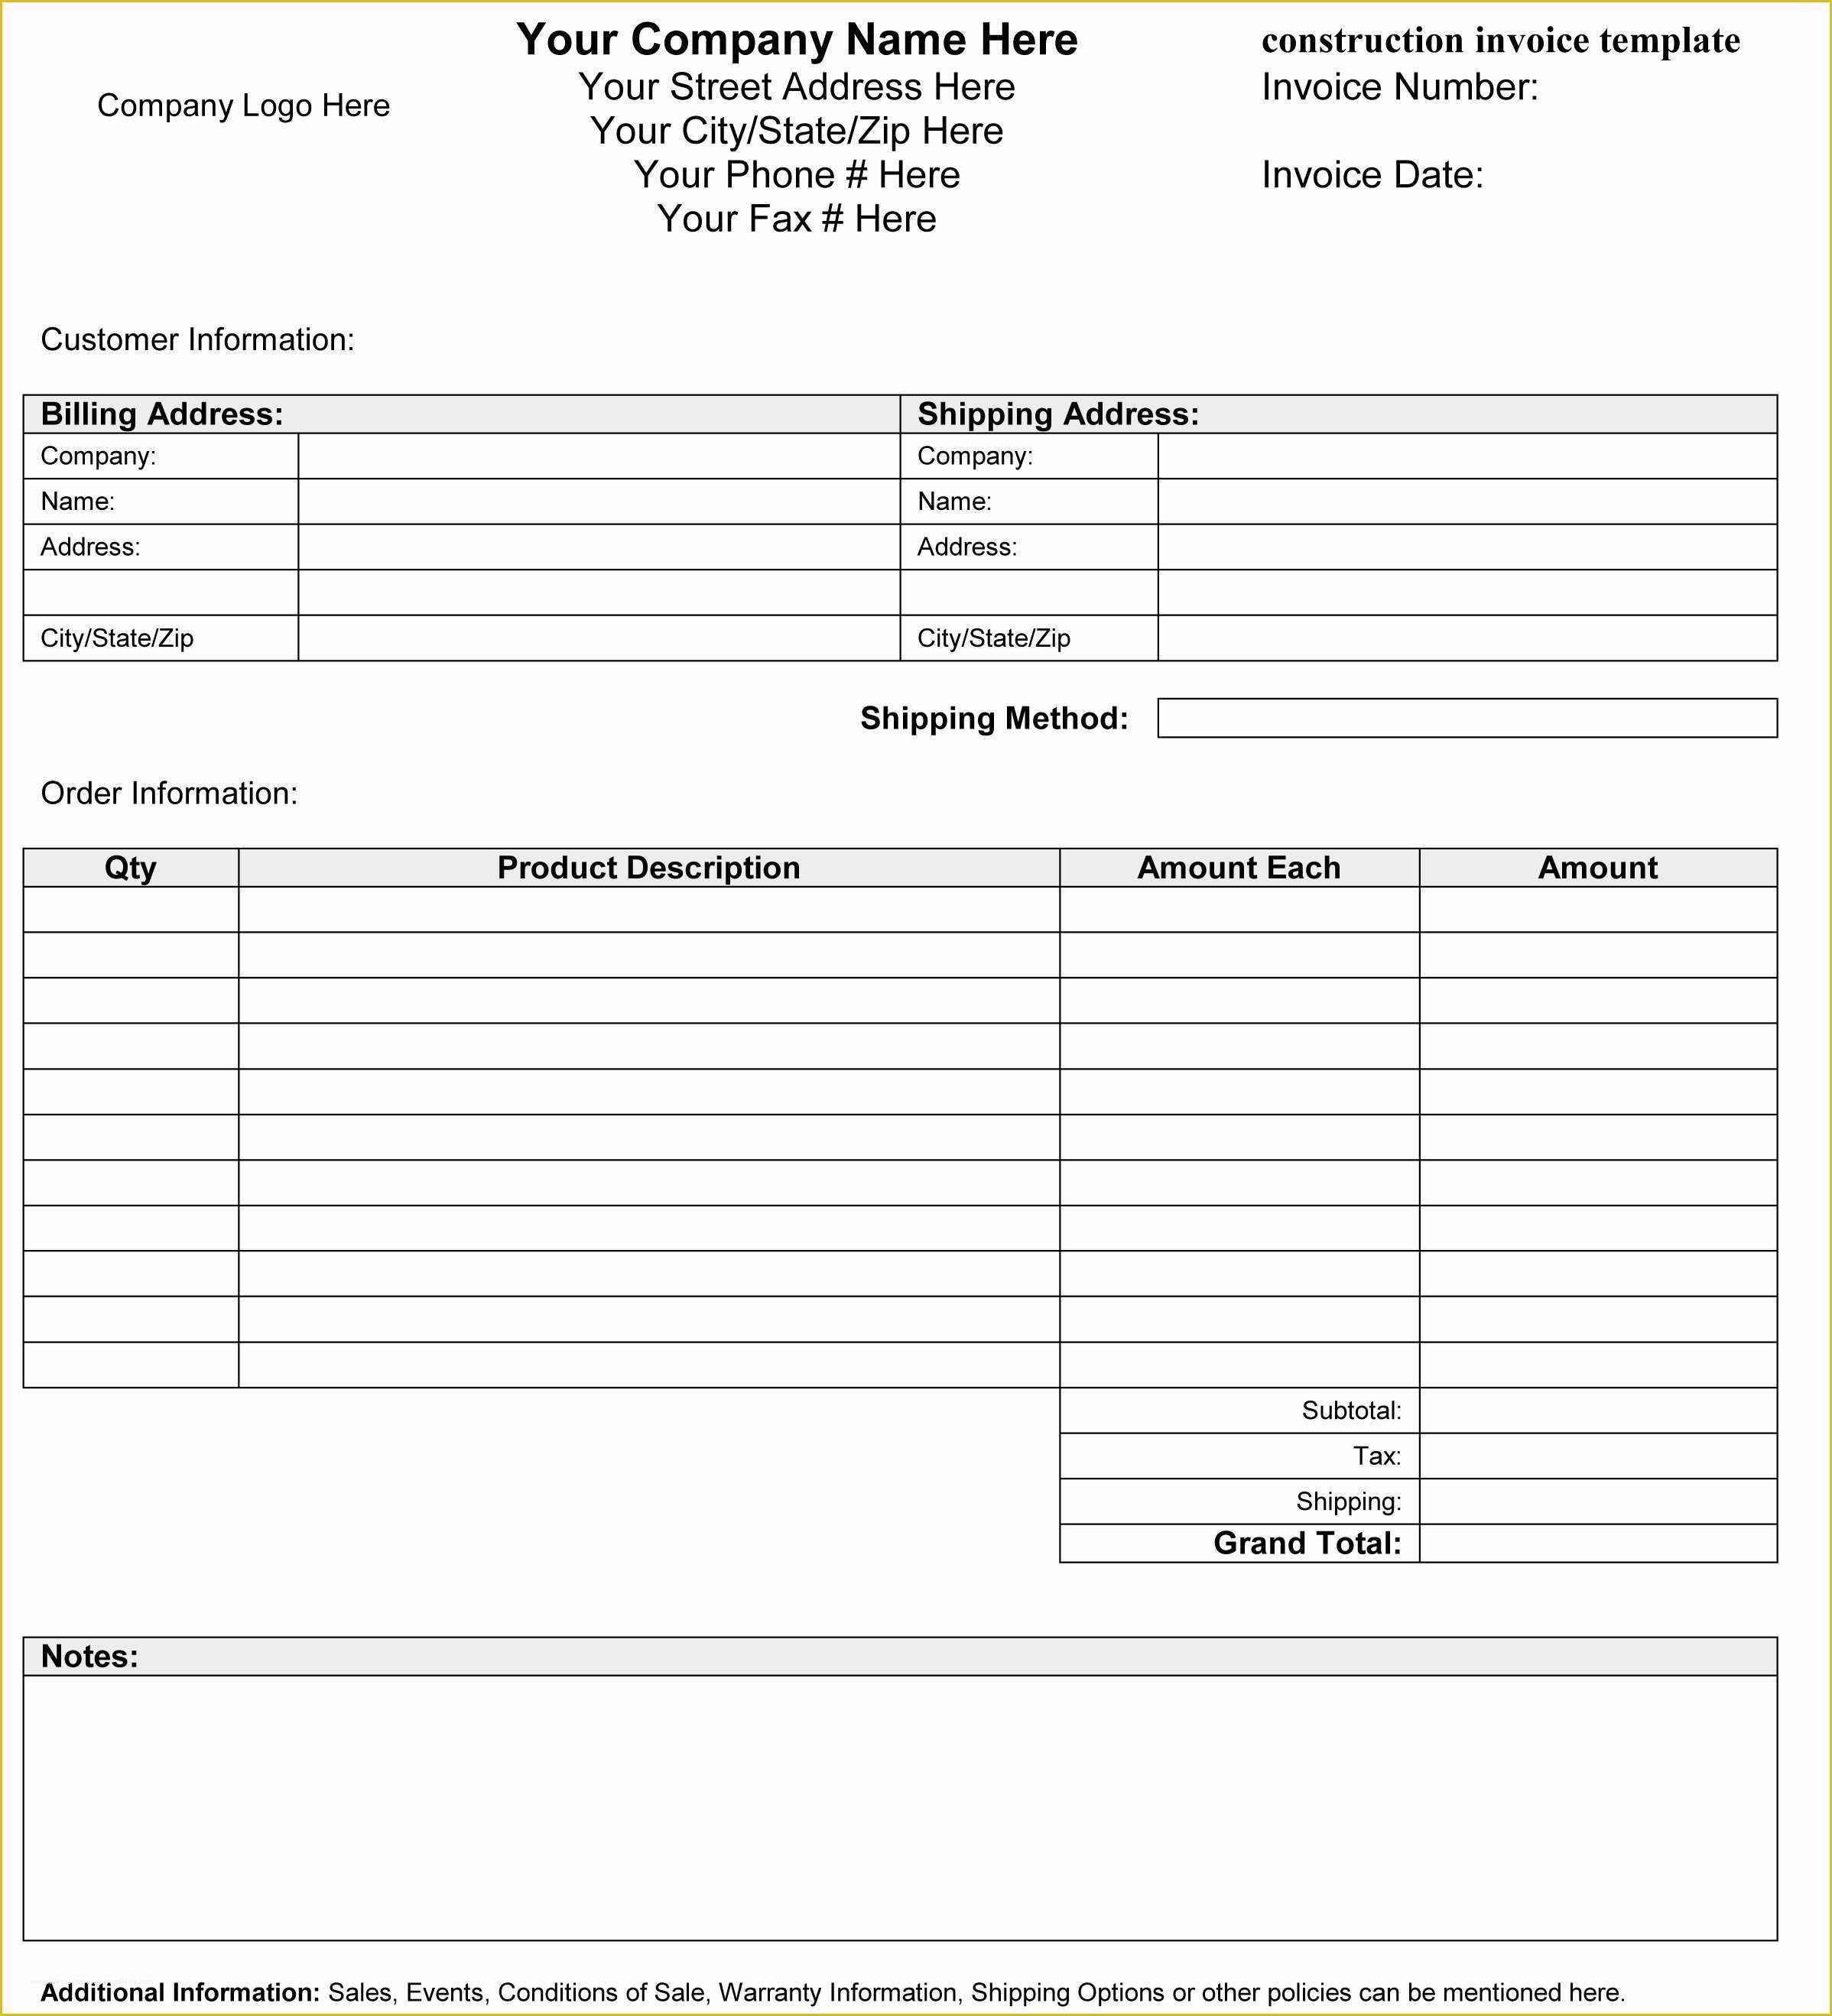 Construction Invoice Templates Free Download Of Construction Invoice Template